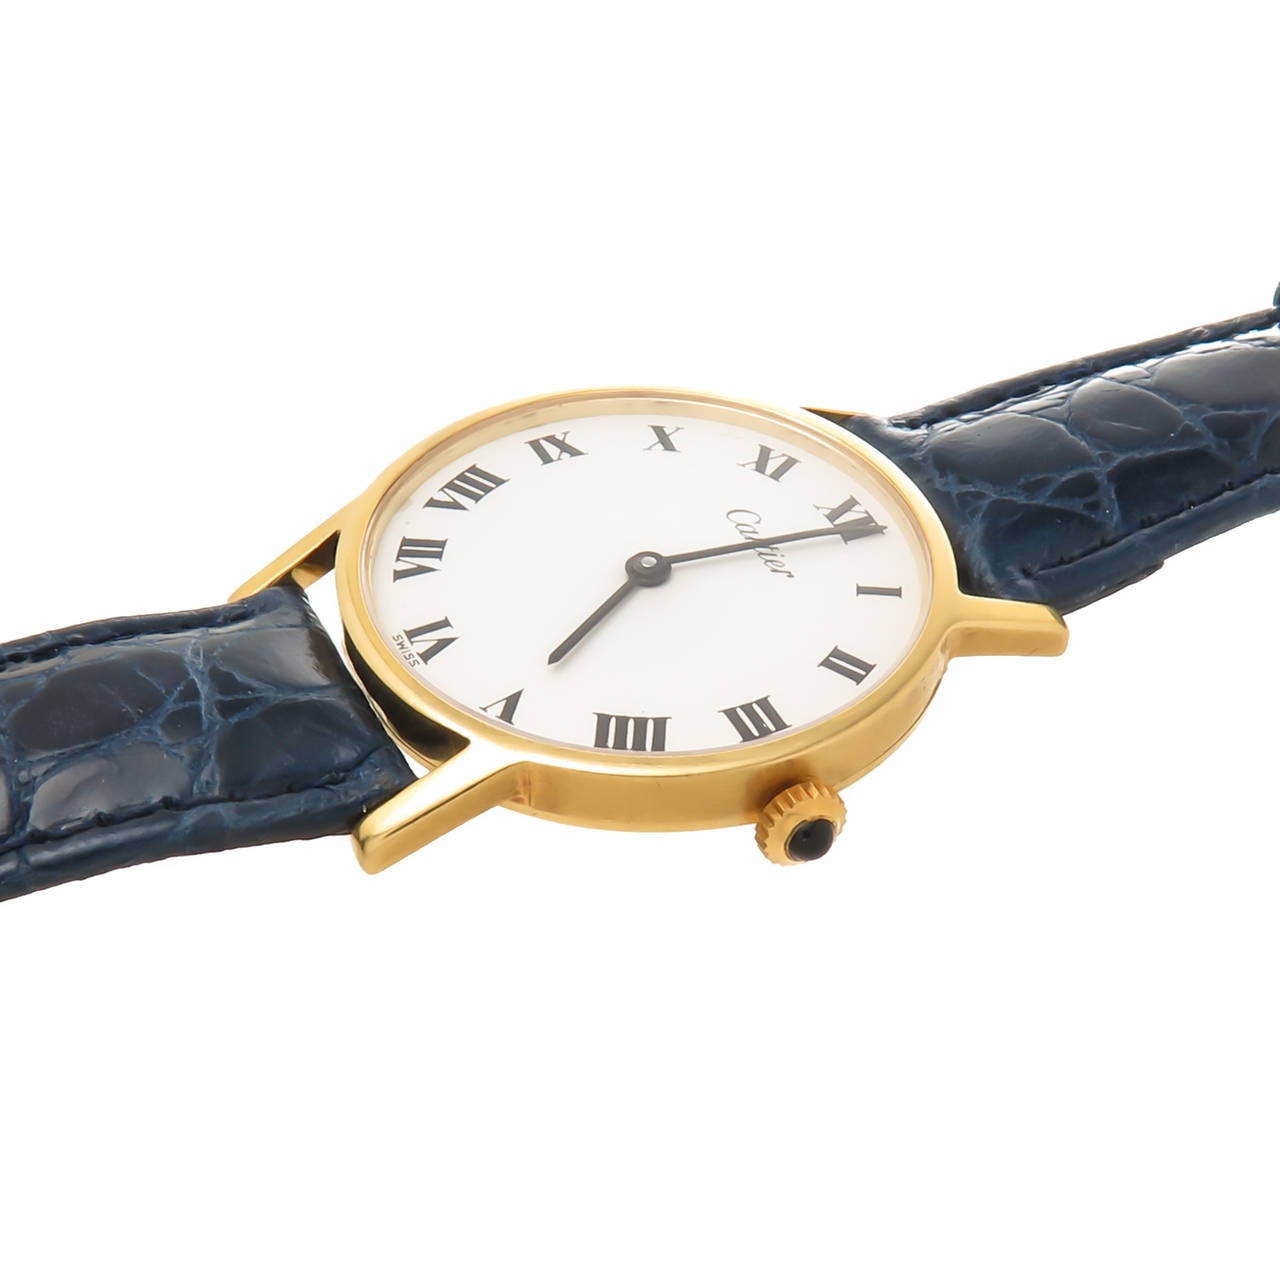 Circa 1980s Cartier Classic round 18K Yellow Gold Wrist Watch, 2 piece 31 MM case. Manual wind 17 Jewel, Cartier Inc Movement. Sapphire crown, White Dial, Black Roman Numerals. New Hadley Roma Dark Blue Leather Strap with Cartier Gold Plate Buckle. 